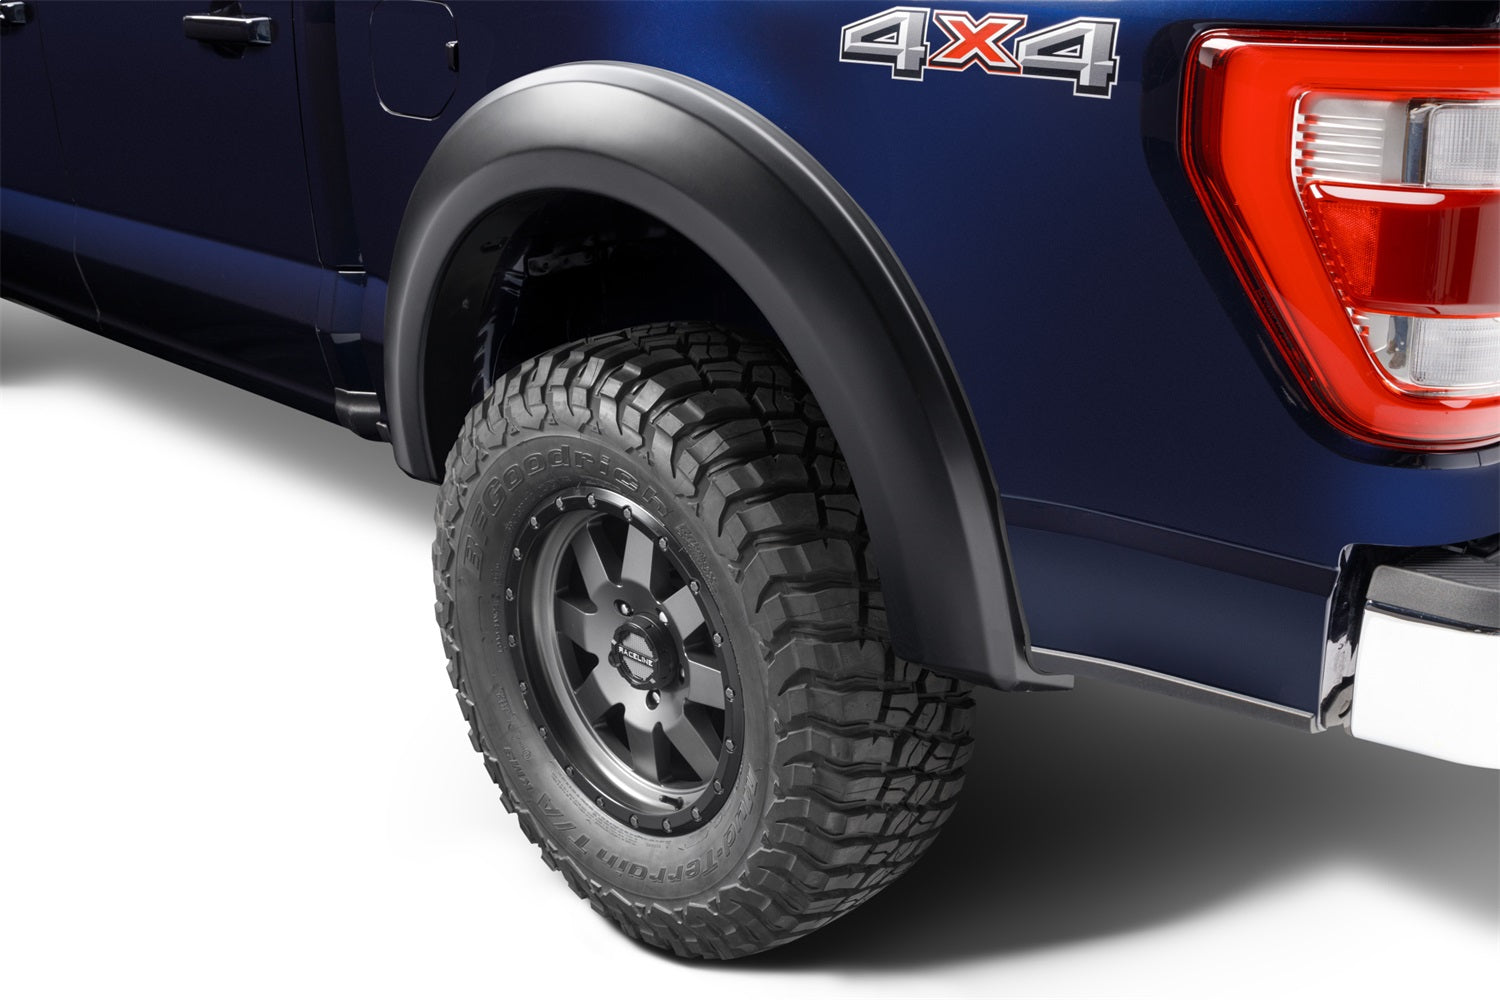 21-C F150 FENDER FLARE EXTEND-A-FENDER STYLE 4PC